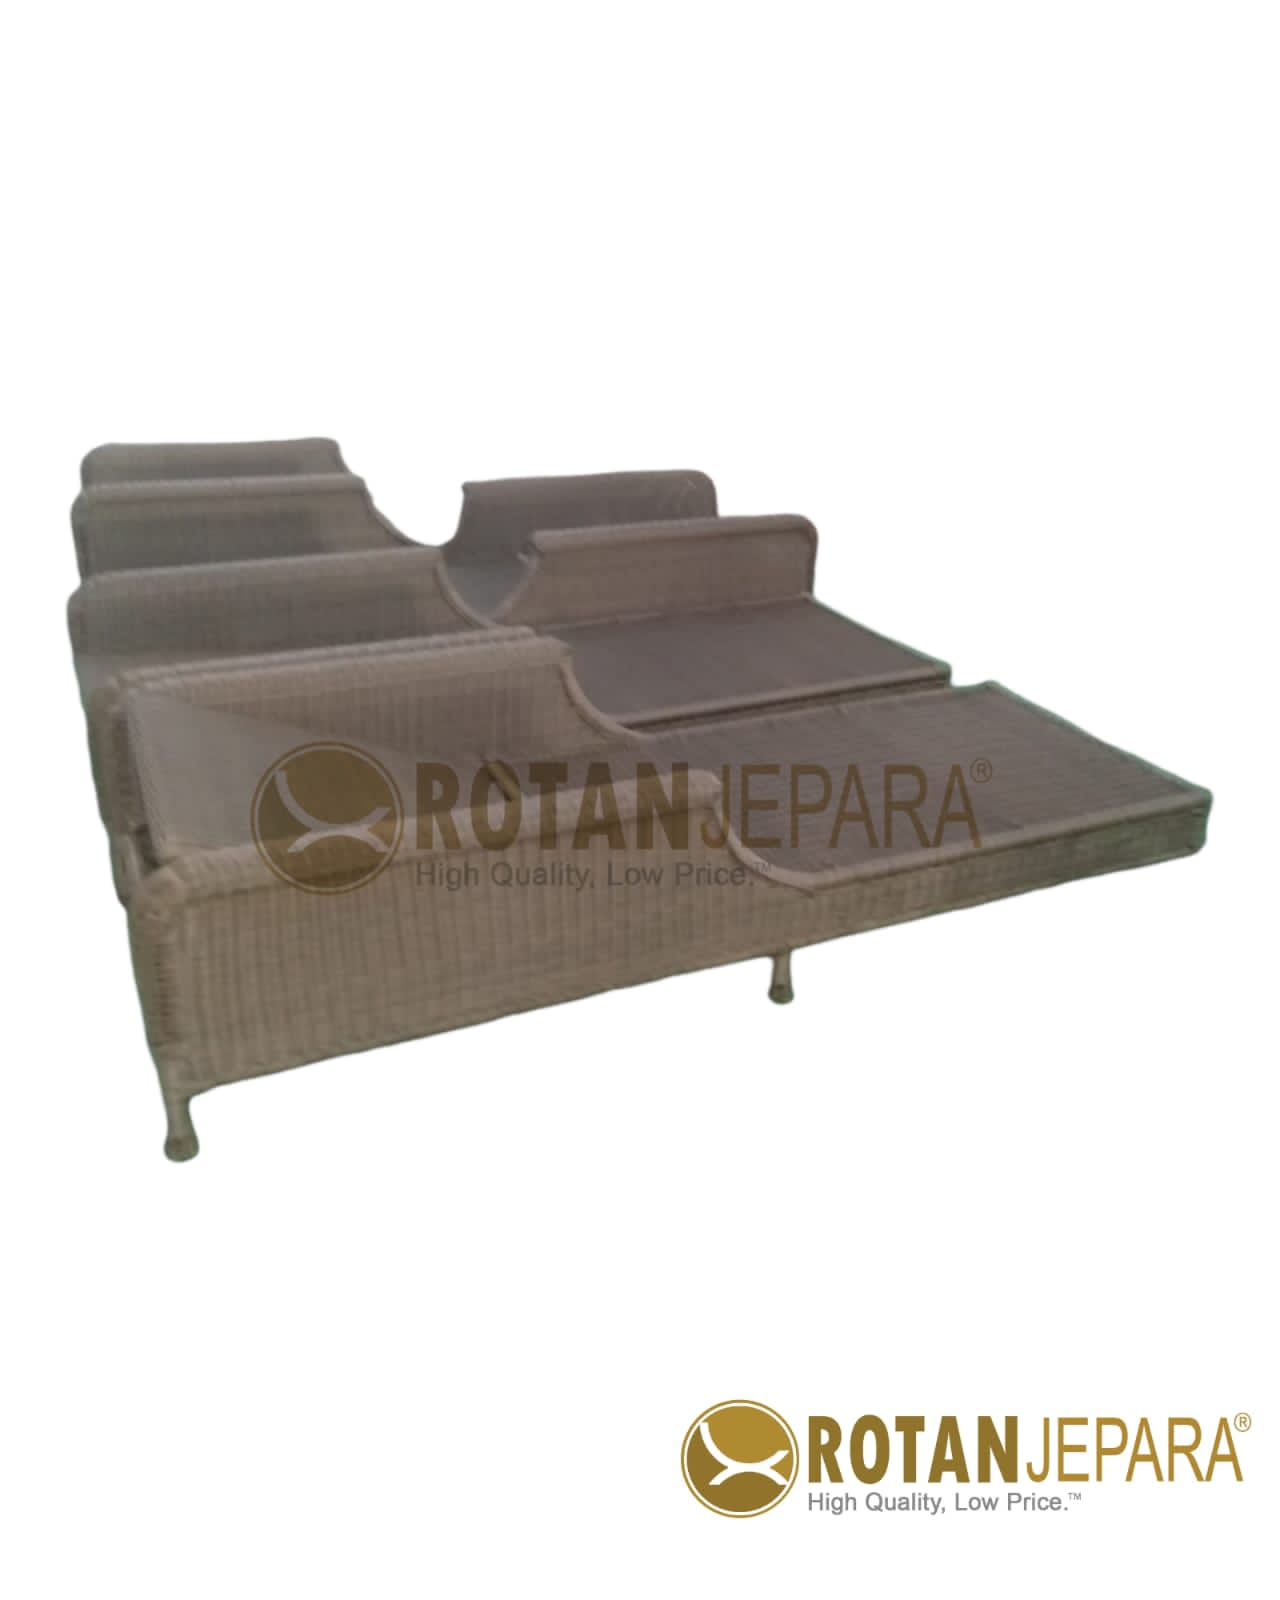 Ifex Chaise Lounge Wicker Synthetic Outdoor Resort